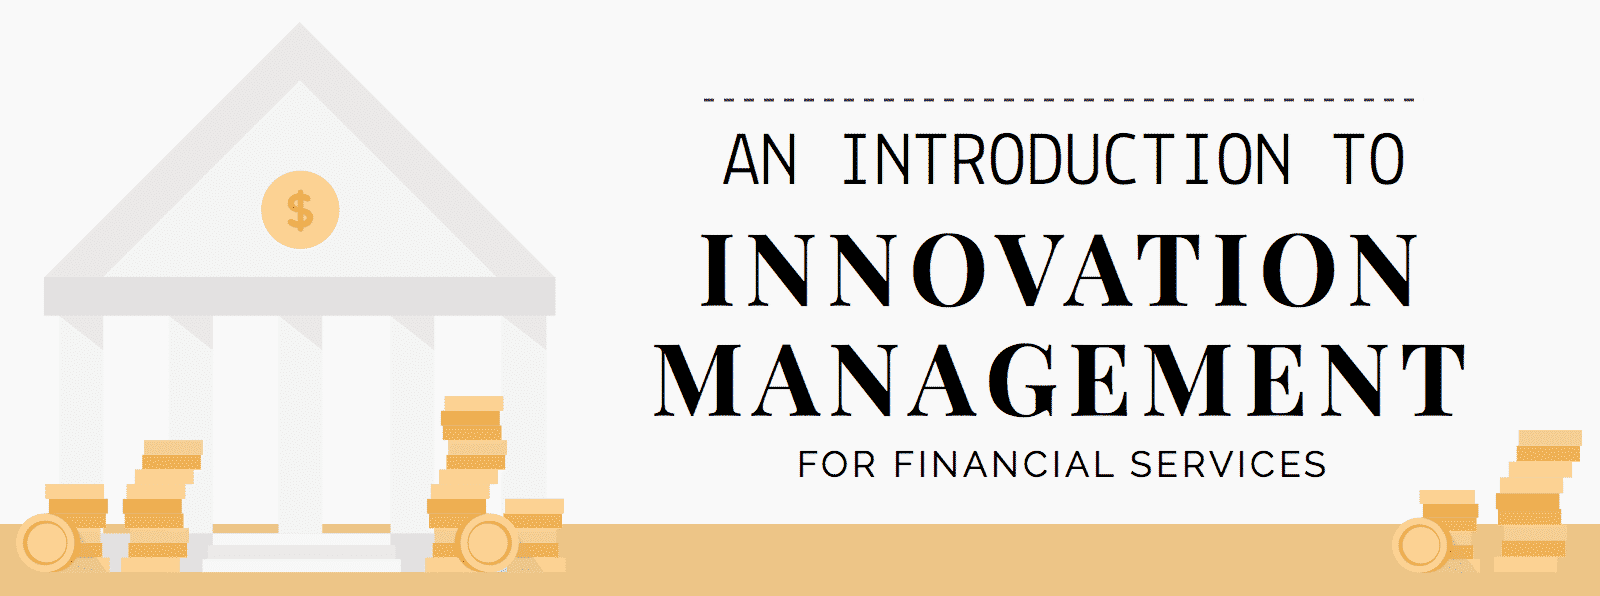 Introduction to Innovation Management for Financial Services